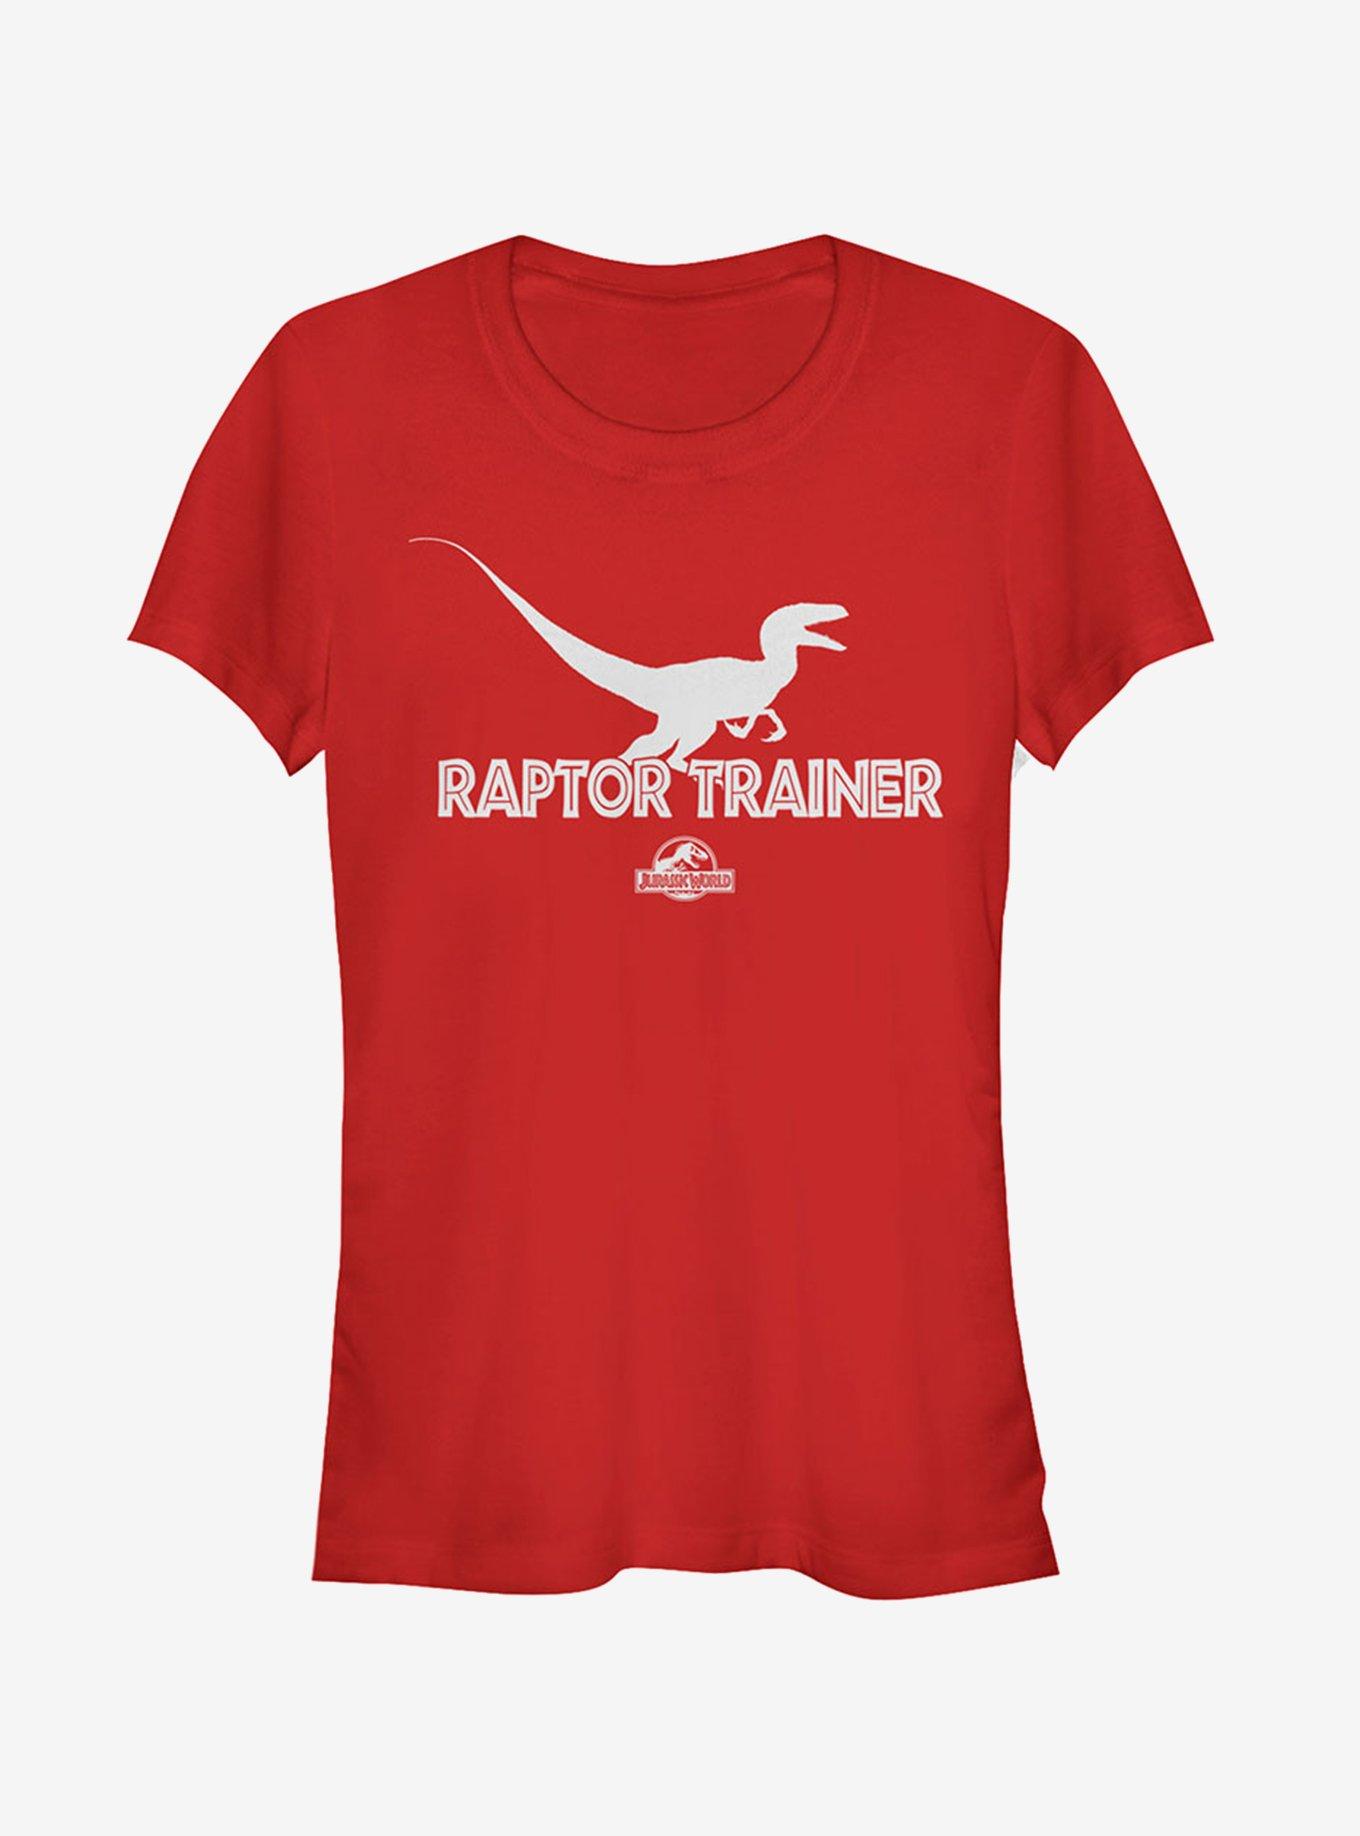 Raptor Trainer Silhouette Girls T-Shirt, RED, hi-res